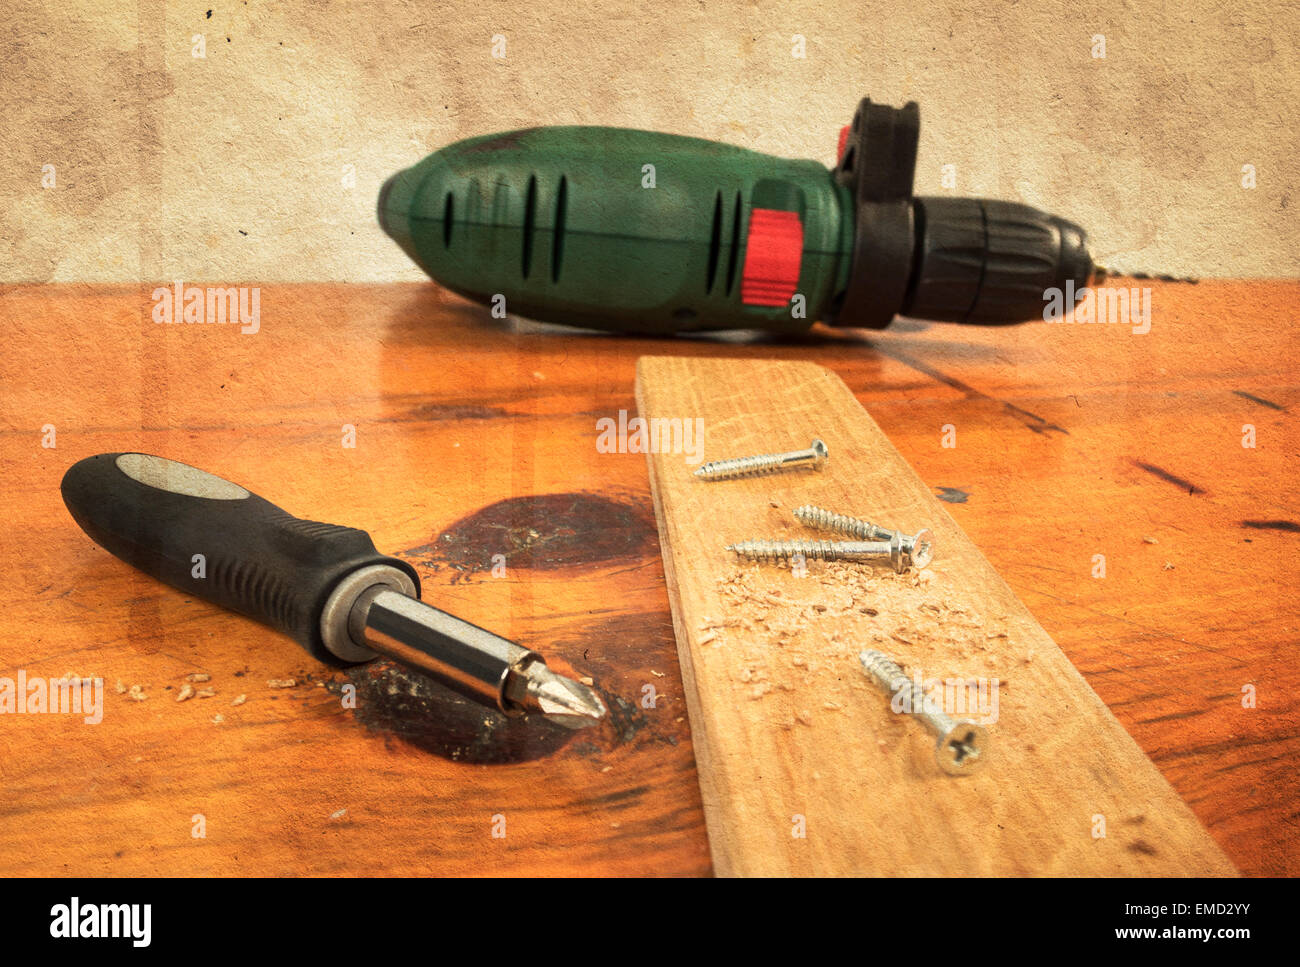 Metal workshop. Electric screwdriver, cordless drill on a wooden board Stock Photo